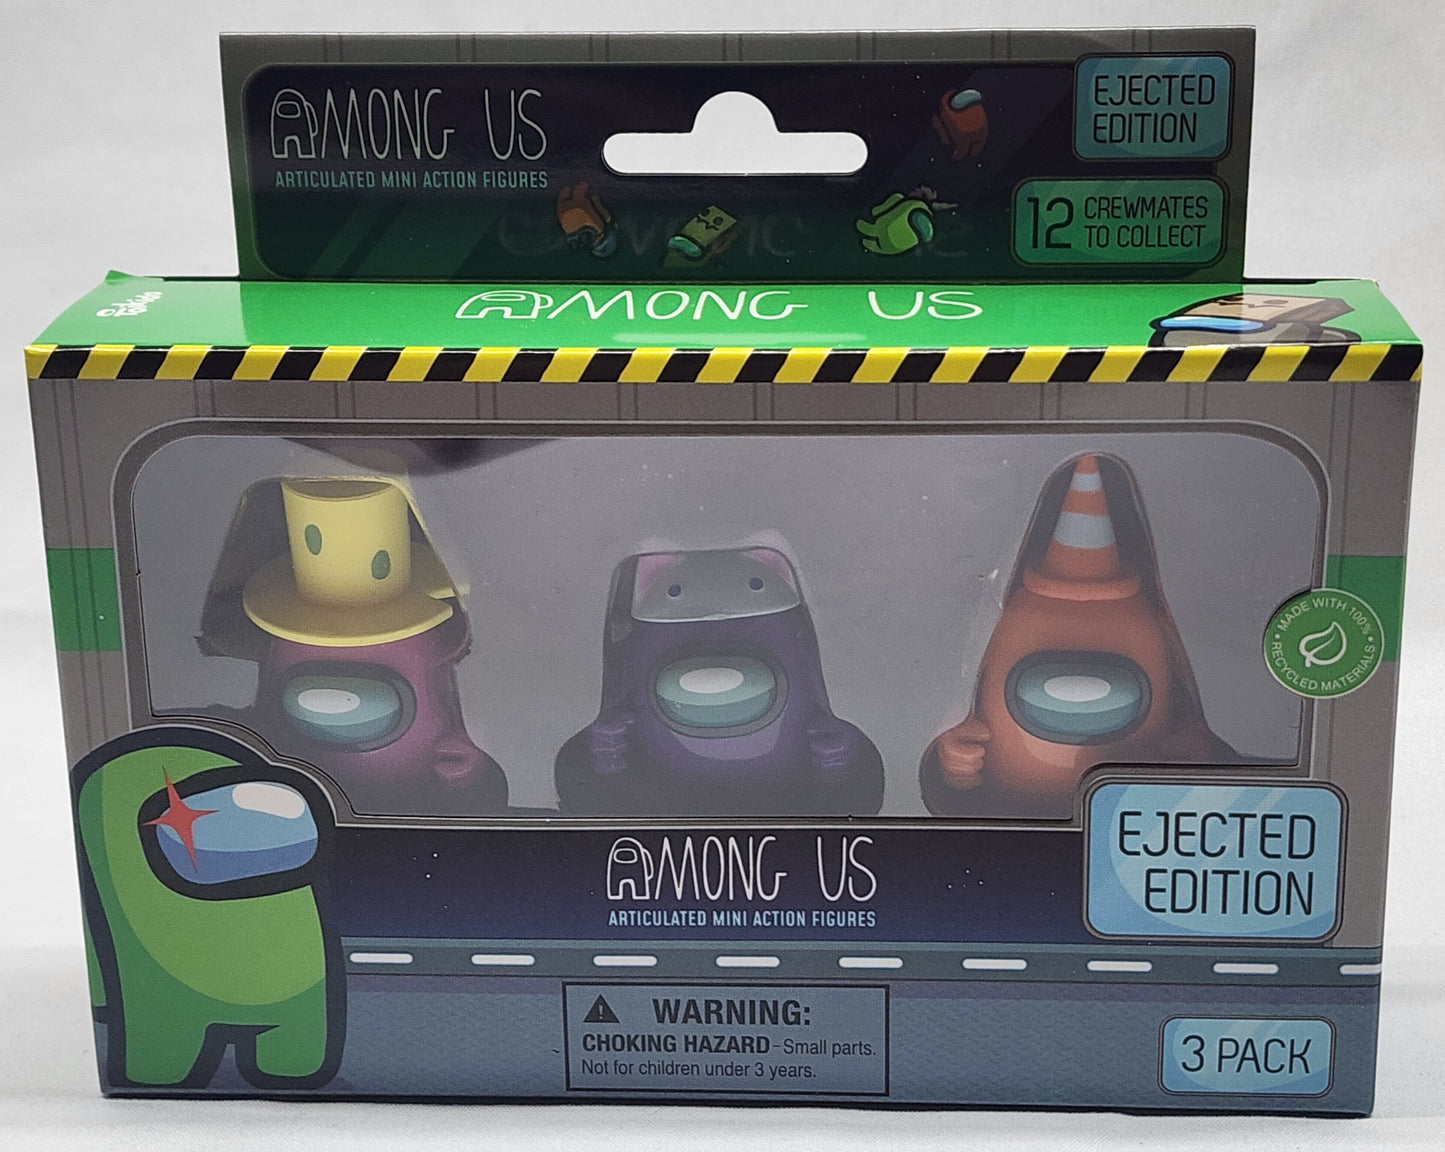 AMONG US Ejected Edition. 3 Pack. New!